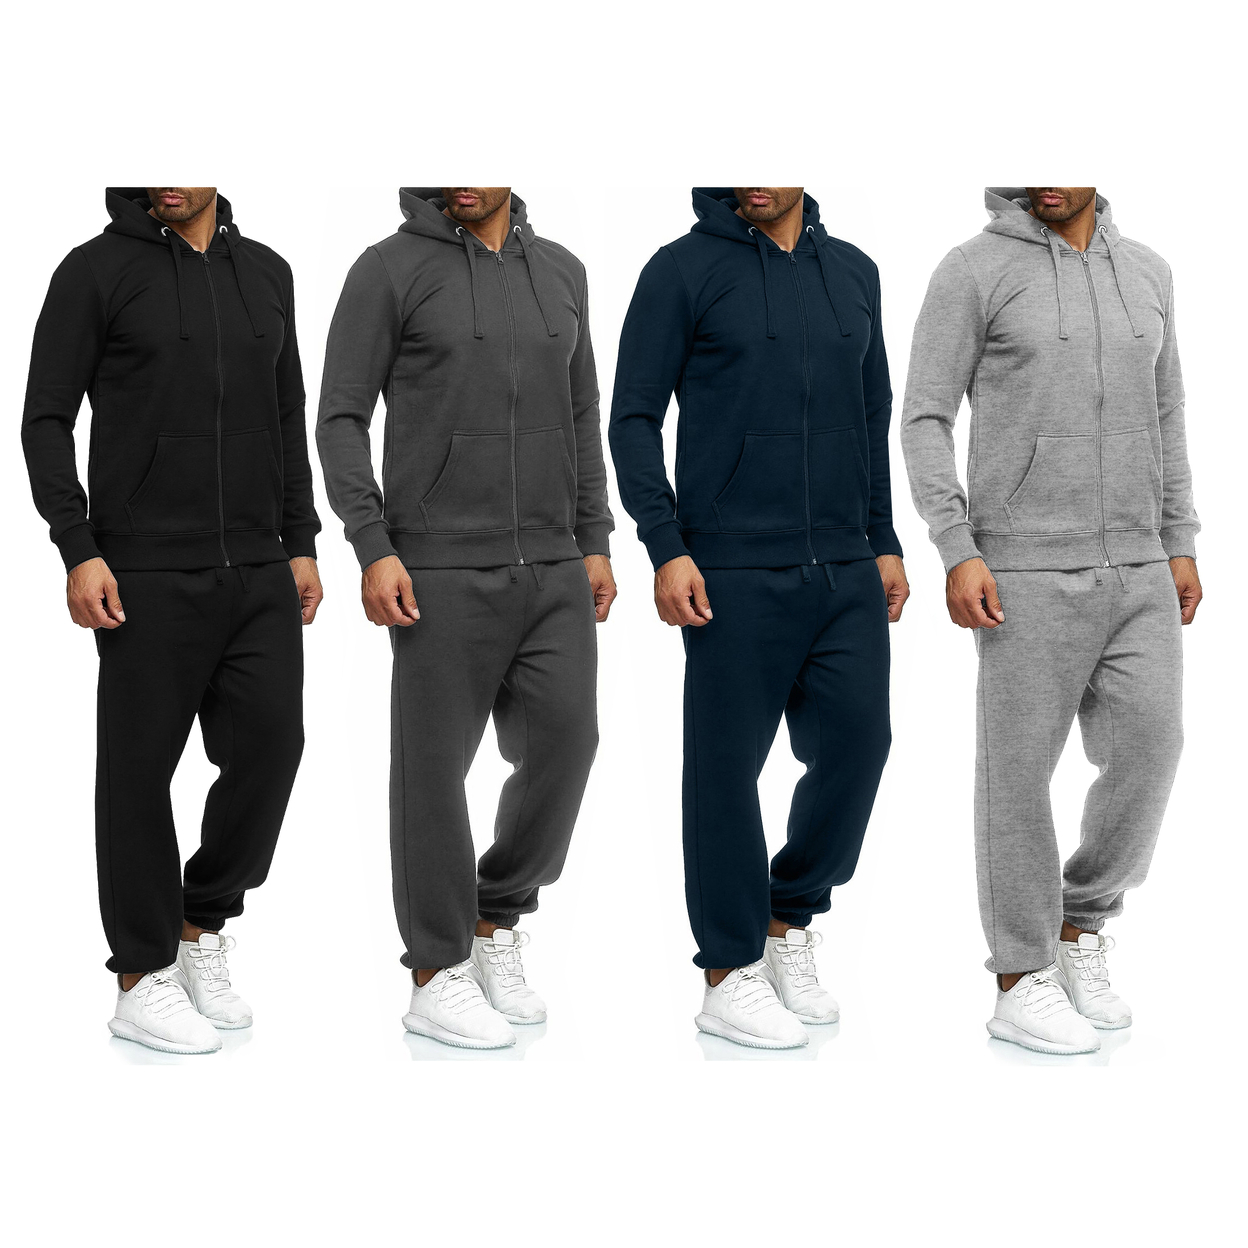 Multi-Pack: Men's Casual Big & Tall Athletic Active Winter Warm Fleece Lined Full Zip Tracksuit Jogger Set - Navy, 2-pack, Large